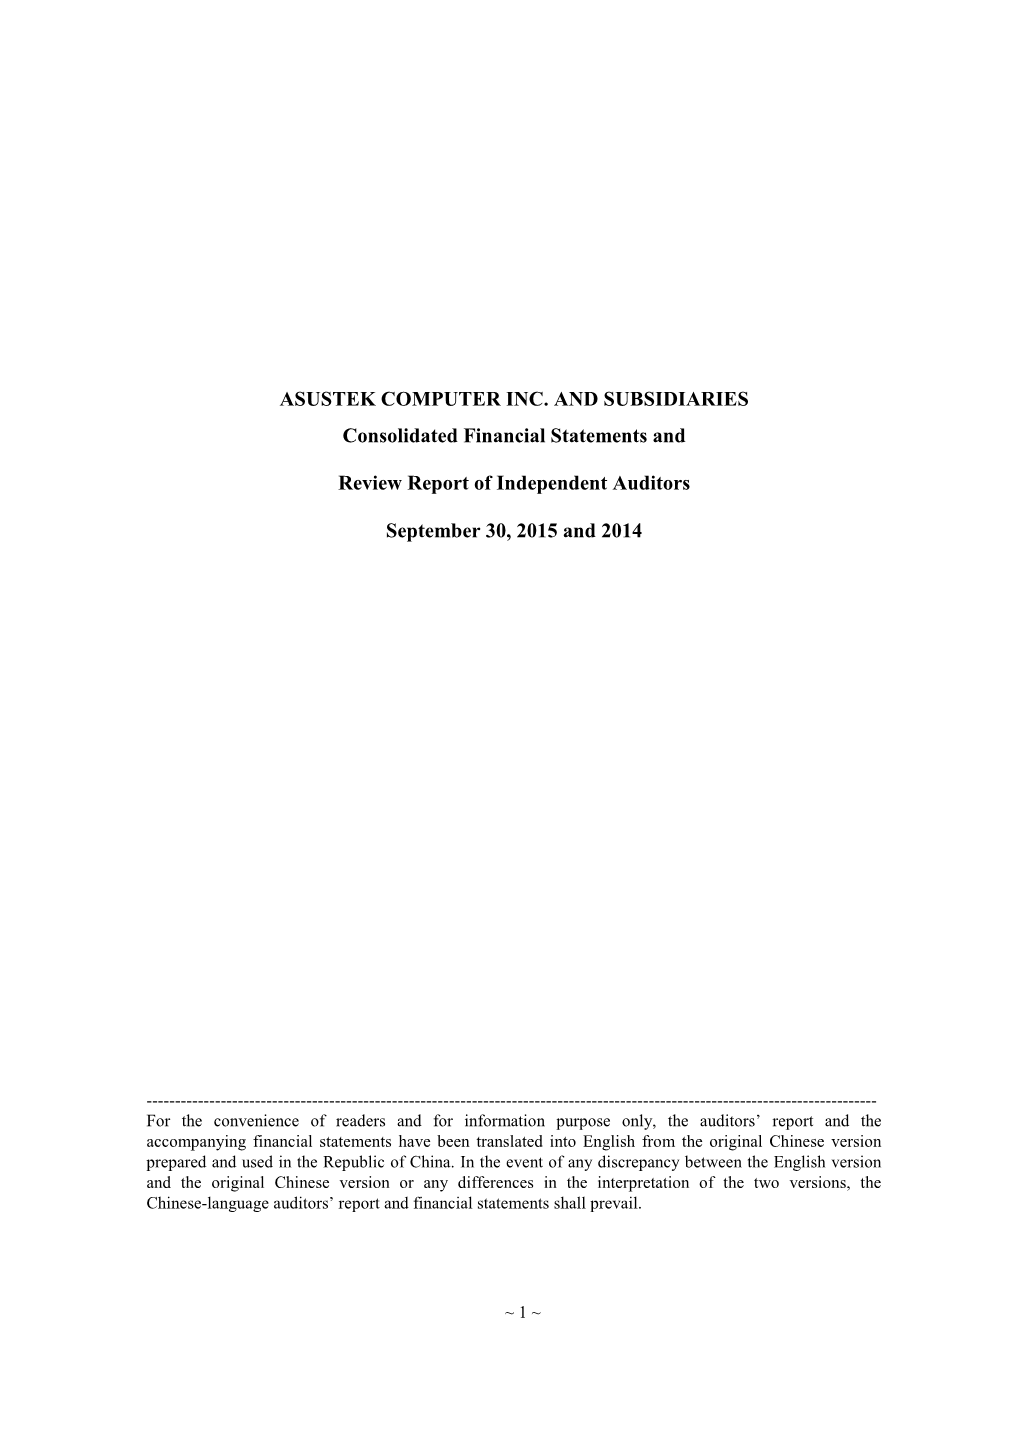 ASUSTEK COMPUTER INC. and SUBSIDIARIES Consolidated Financial Statements And